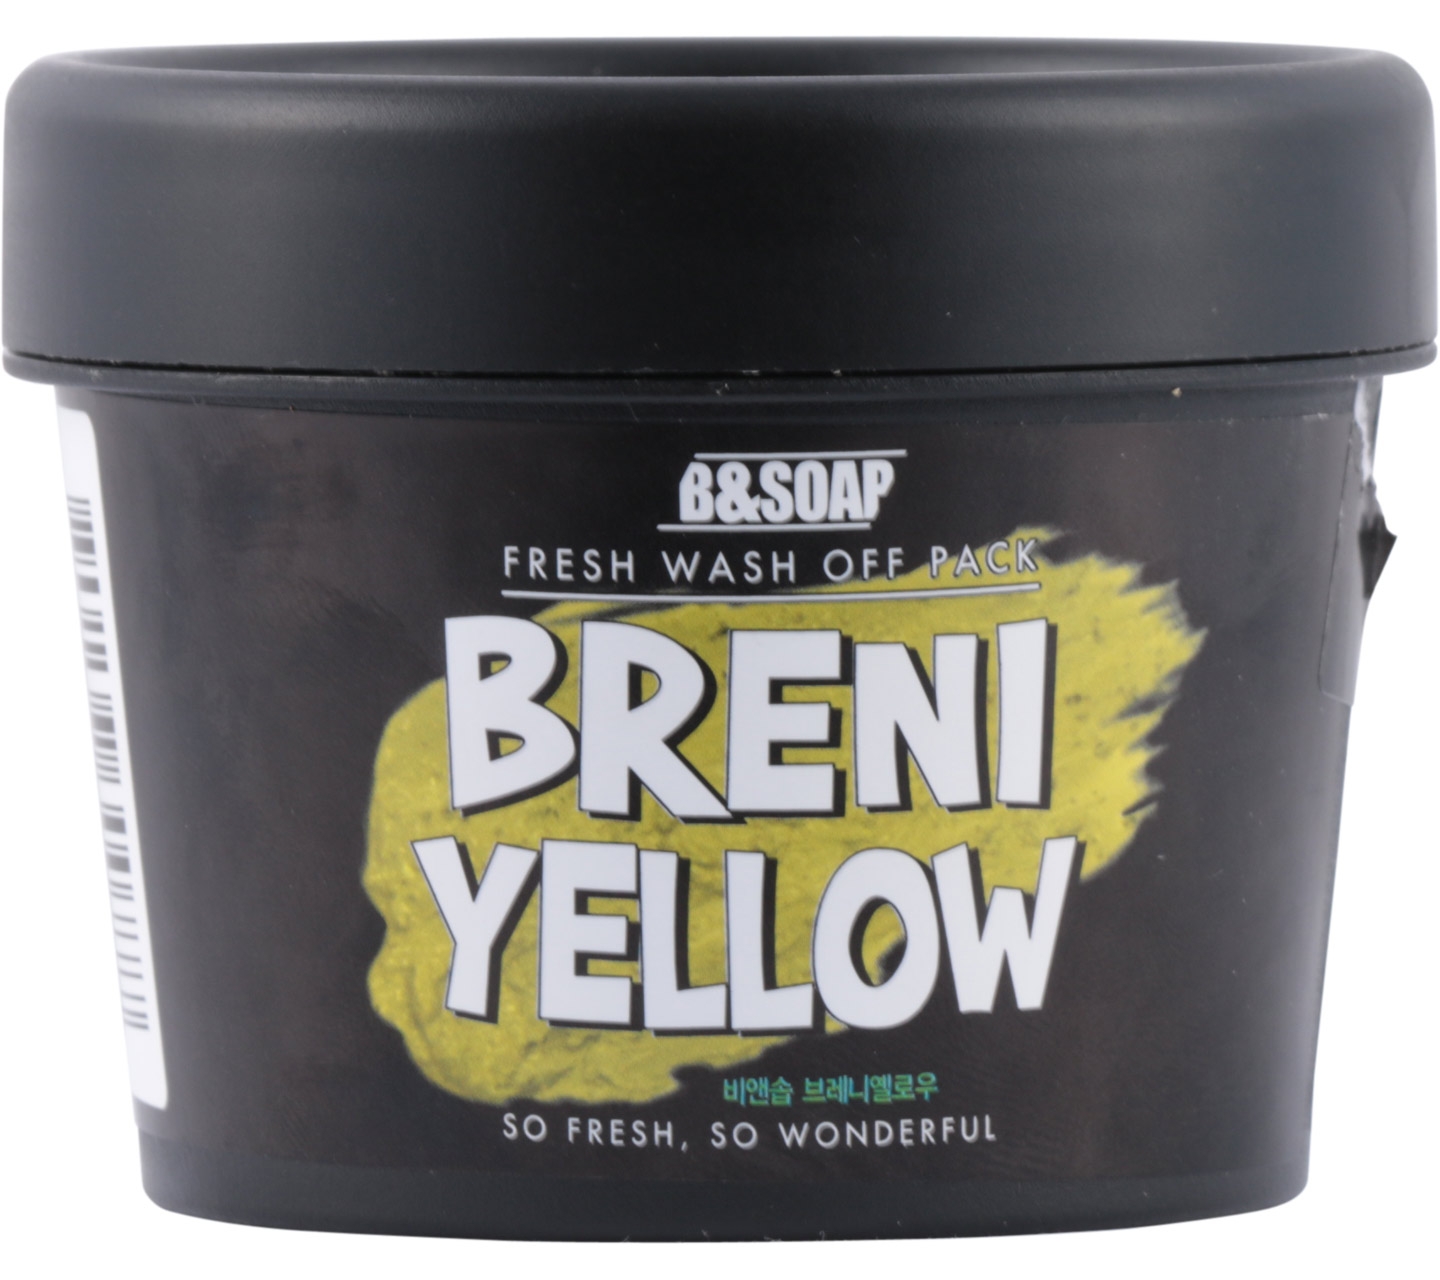 B&Soap Breni Yellow Fresh Wash Off Pack Faces